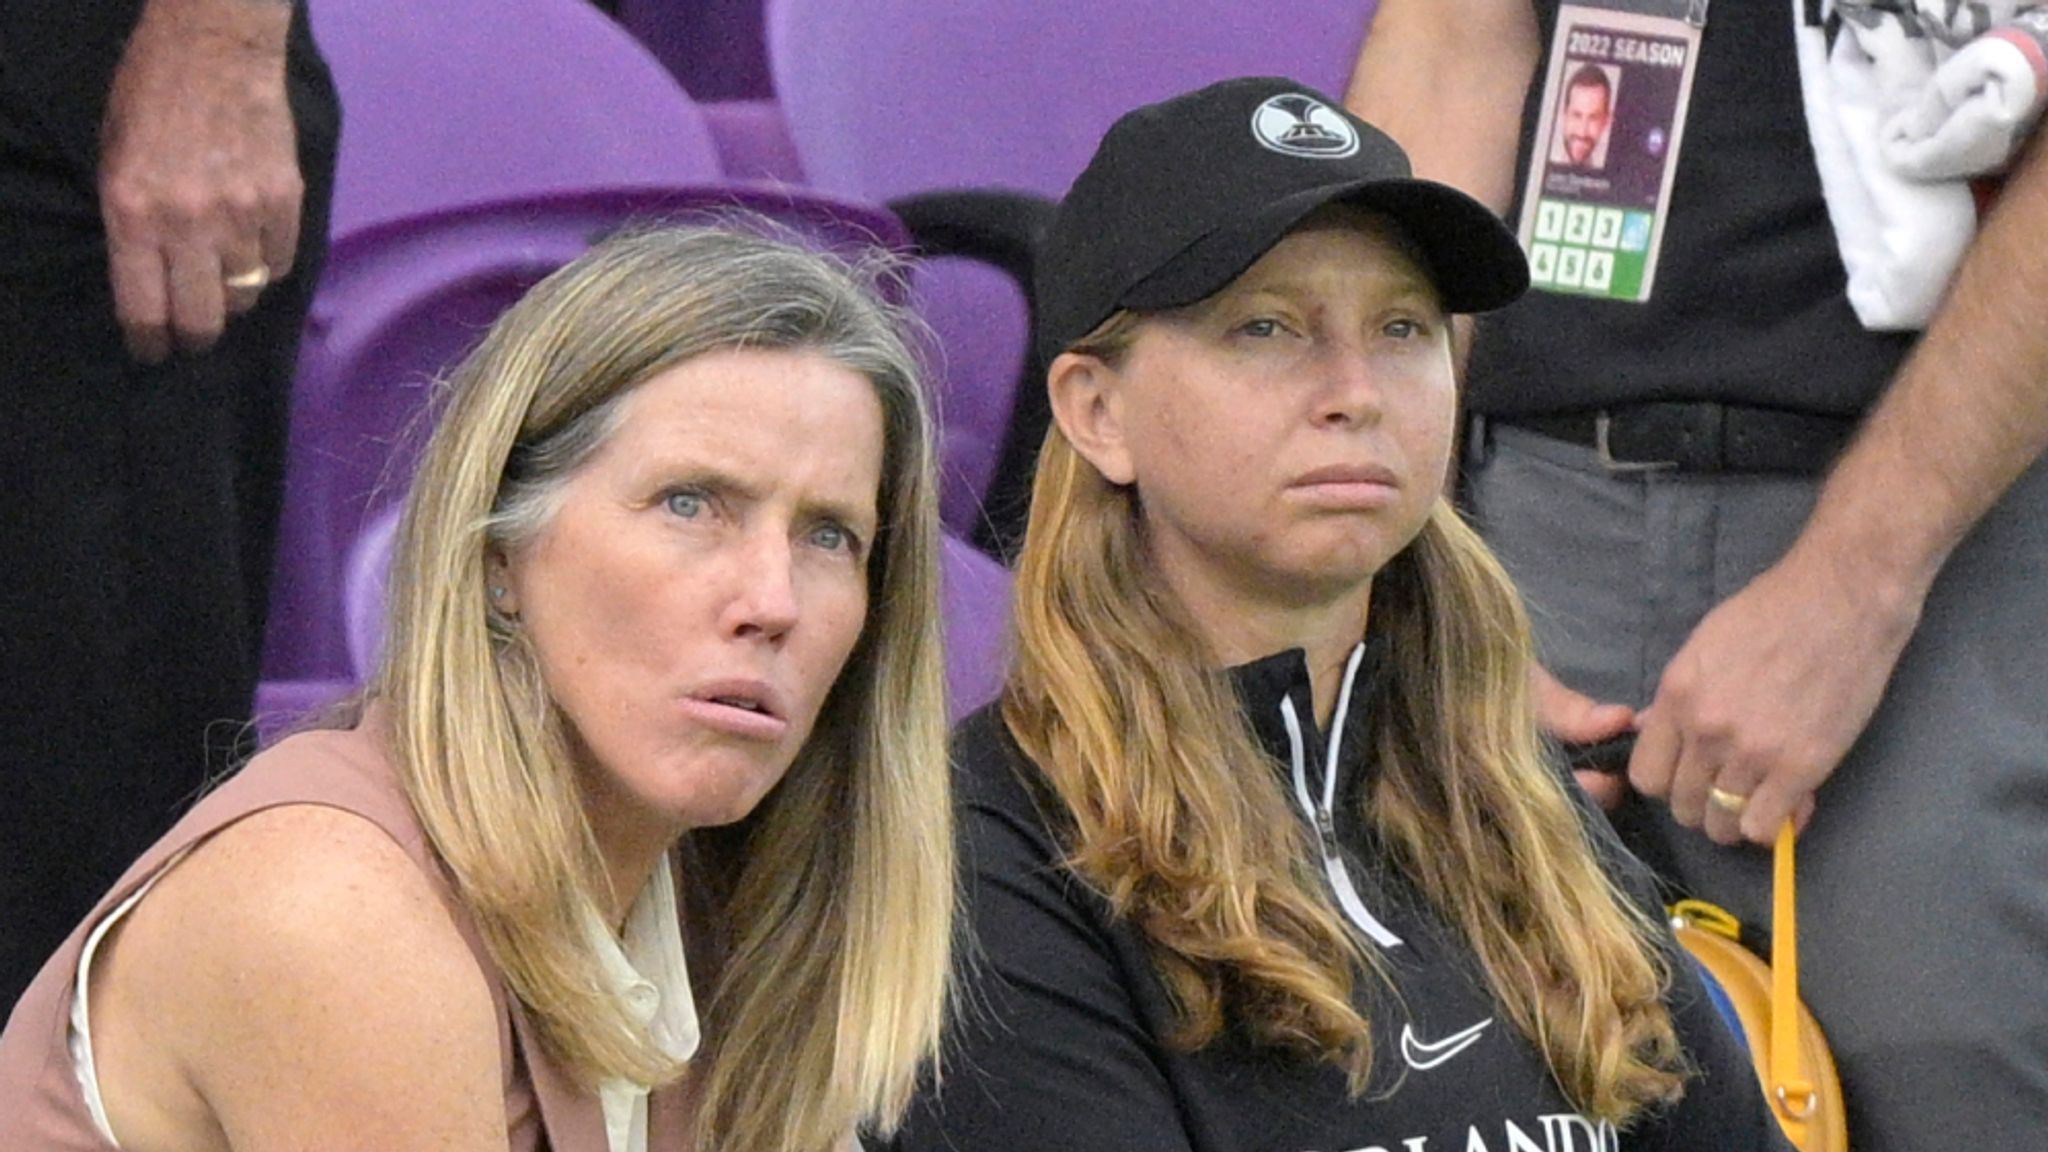 Orlando Pride coaches fired by NWSL following allegations of verbal abuse,  favouritism and retaliatory behaviour | Football News | Sky Sports